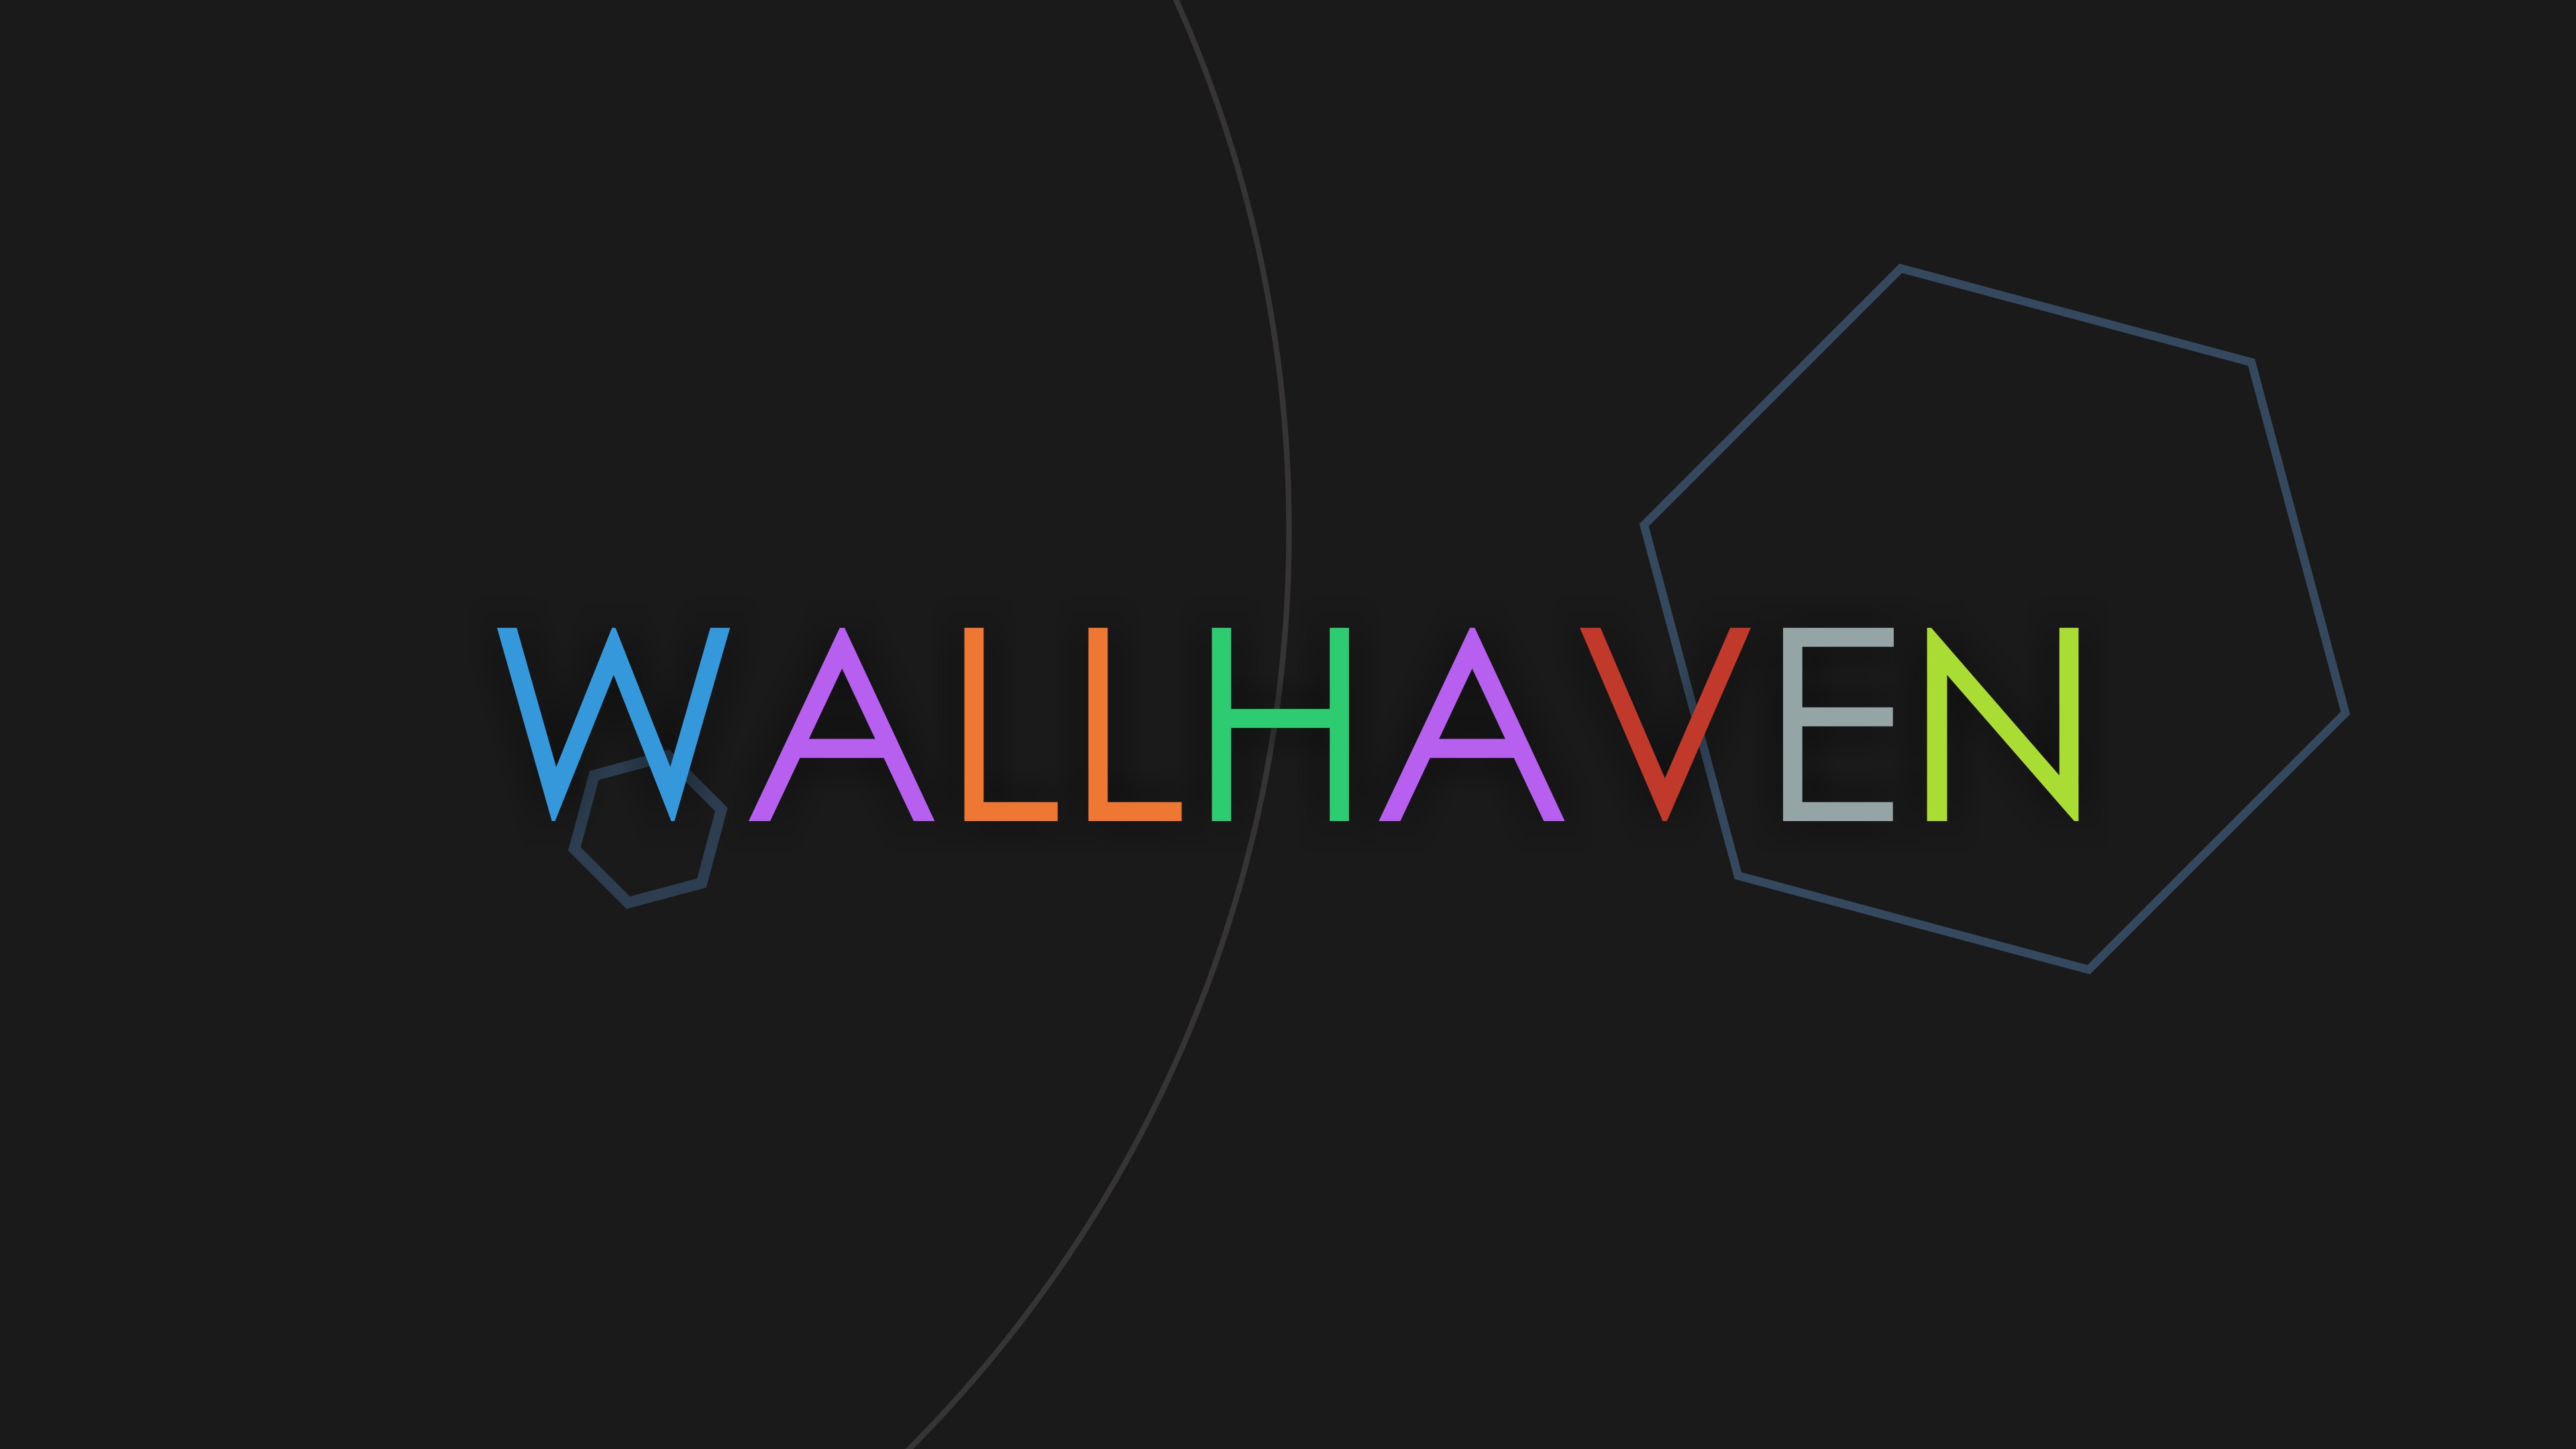 wallhaven, Text, Hexagon, Minimalism, Black background, Colorful Wallpaper